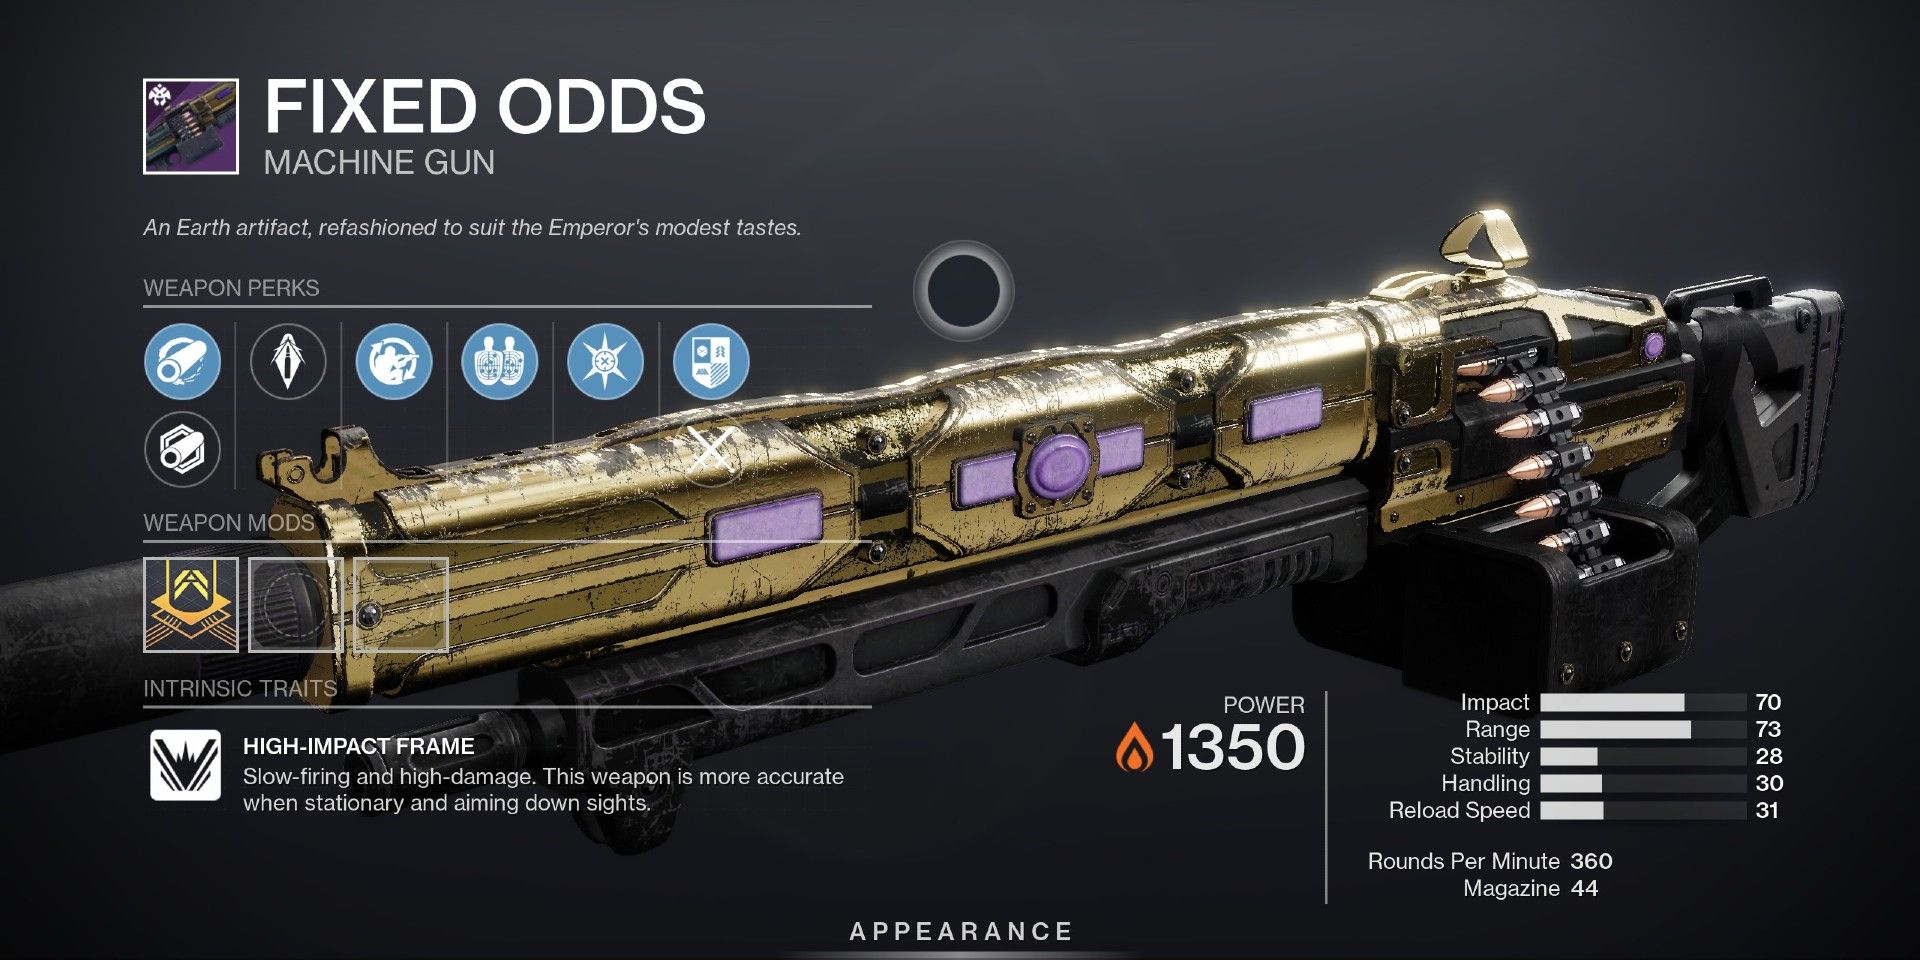 Fixed Odds Destiny 2 Guide – God Roll and How to Get It